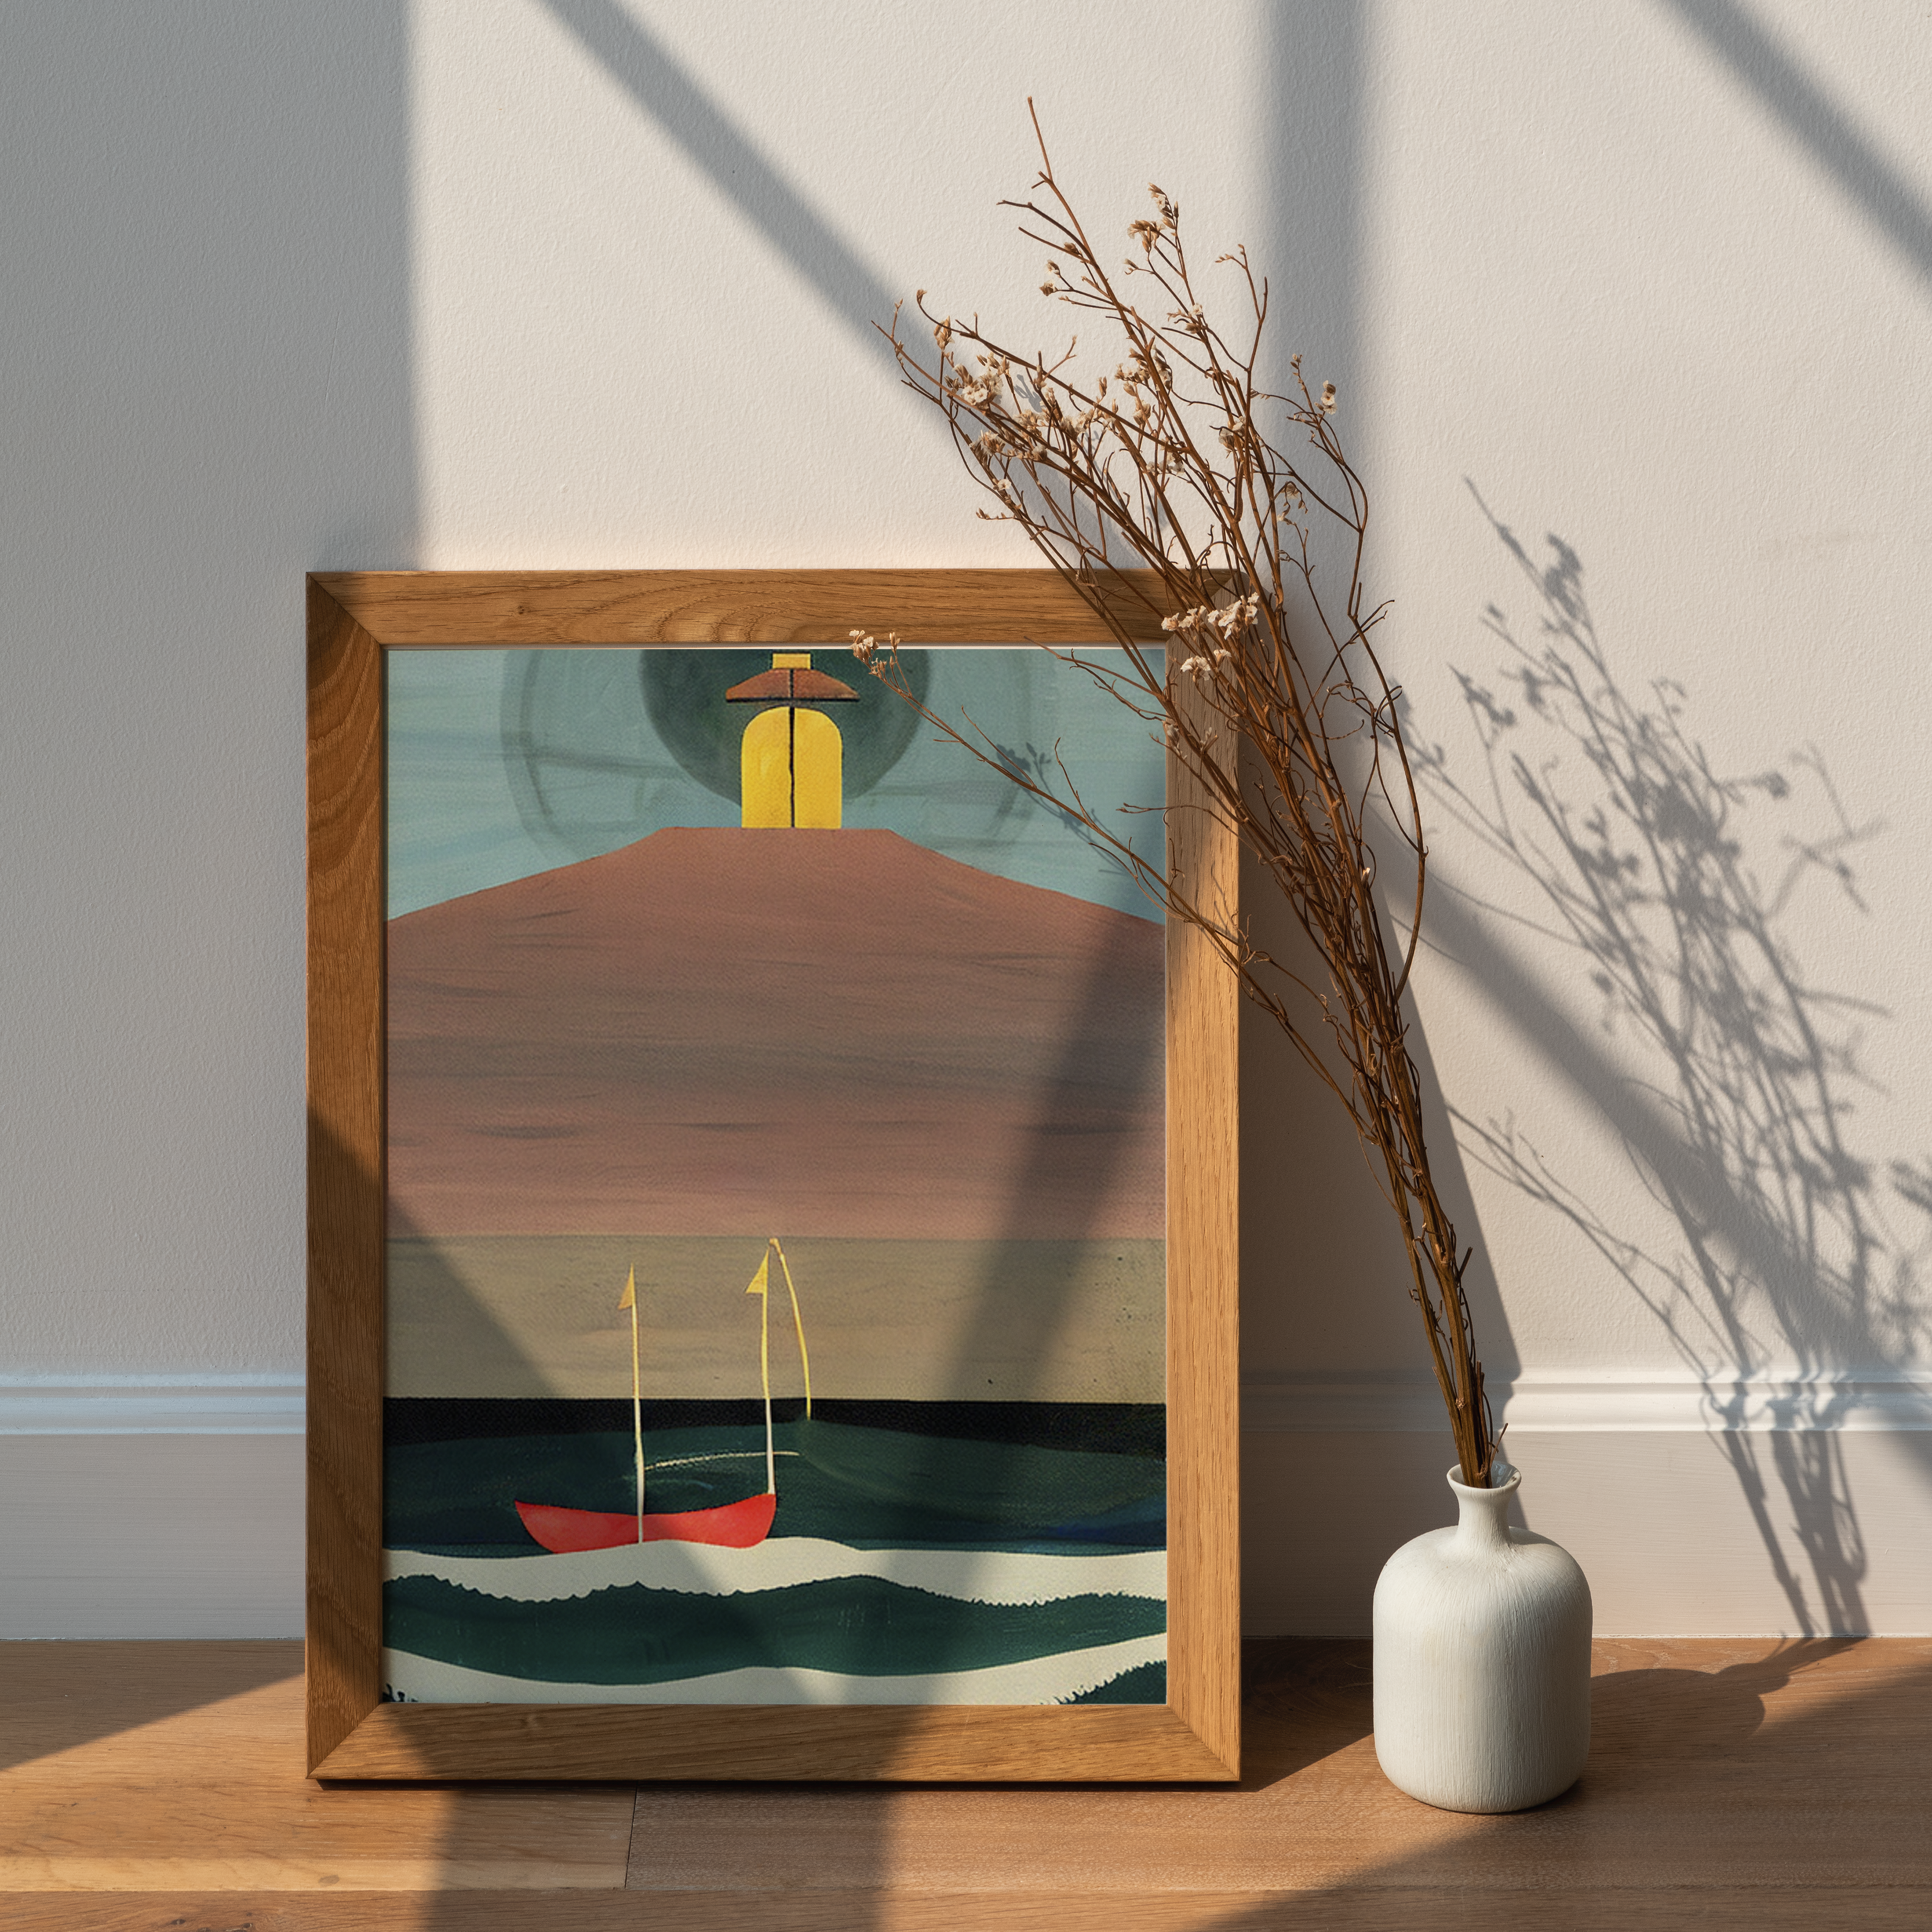 A printed art deco poster of a fishing boat, the poster is leaning against a wall